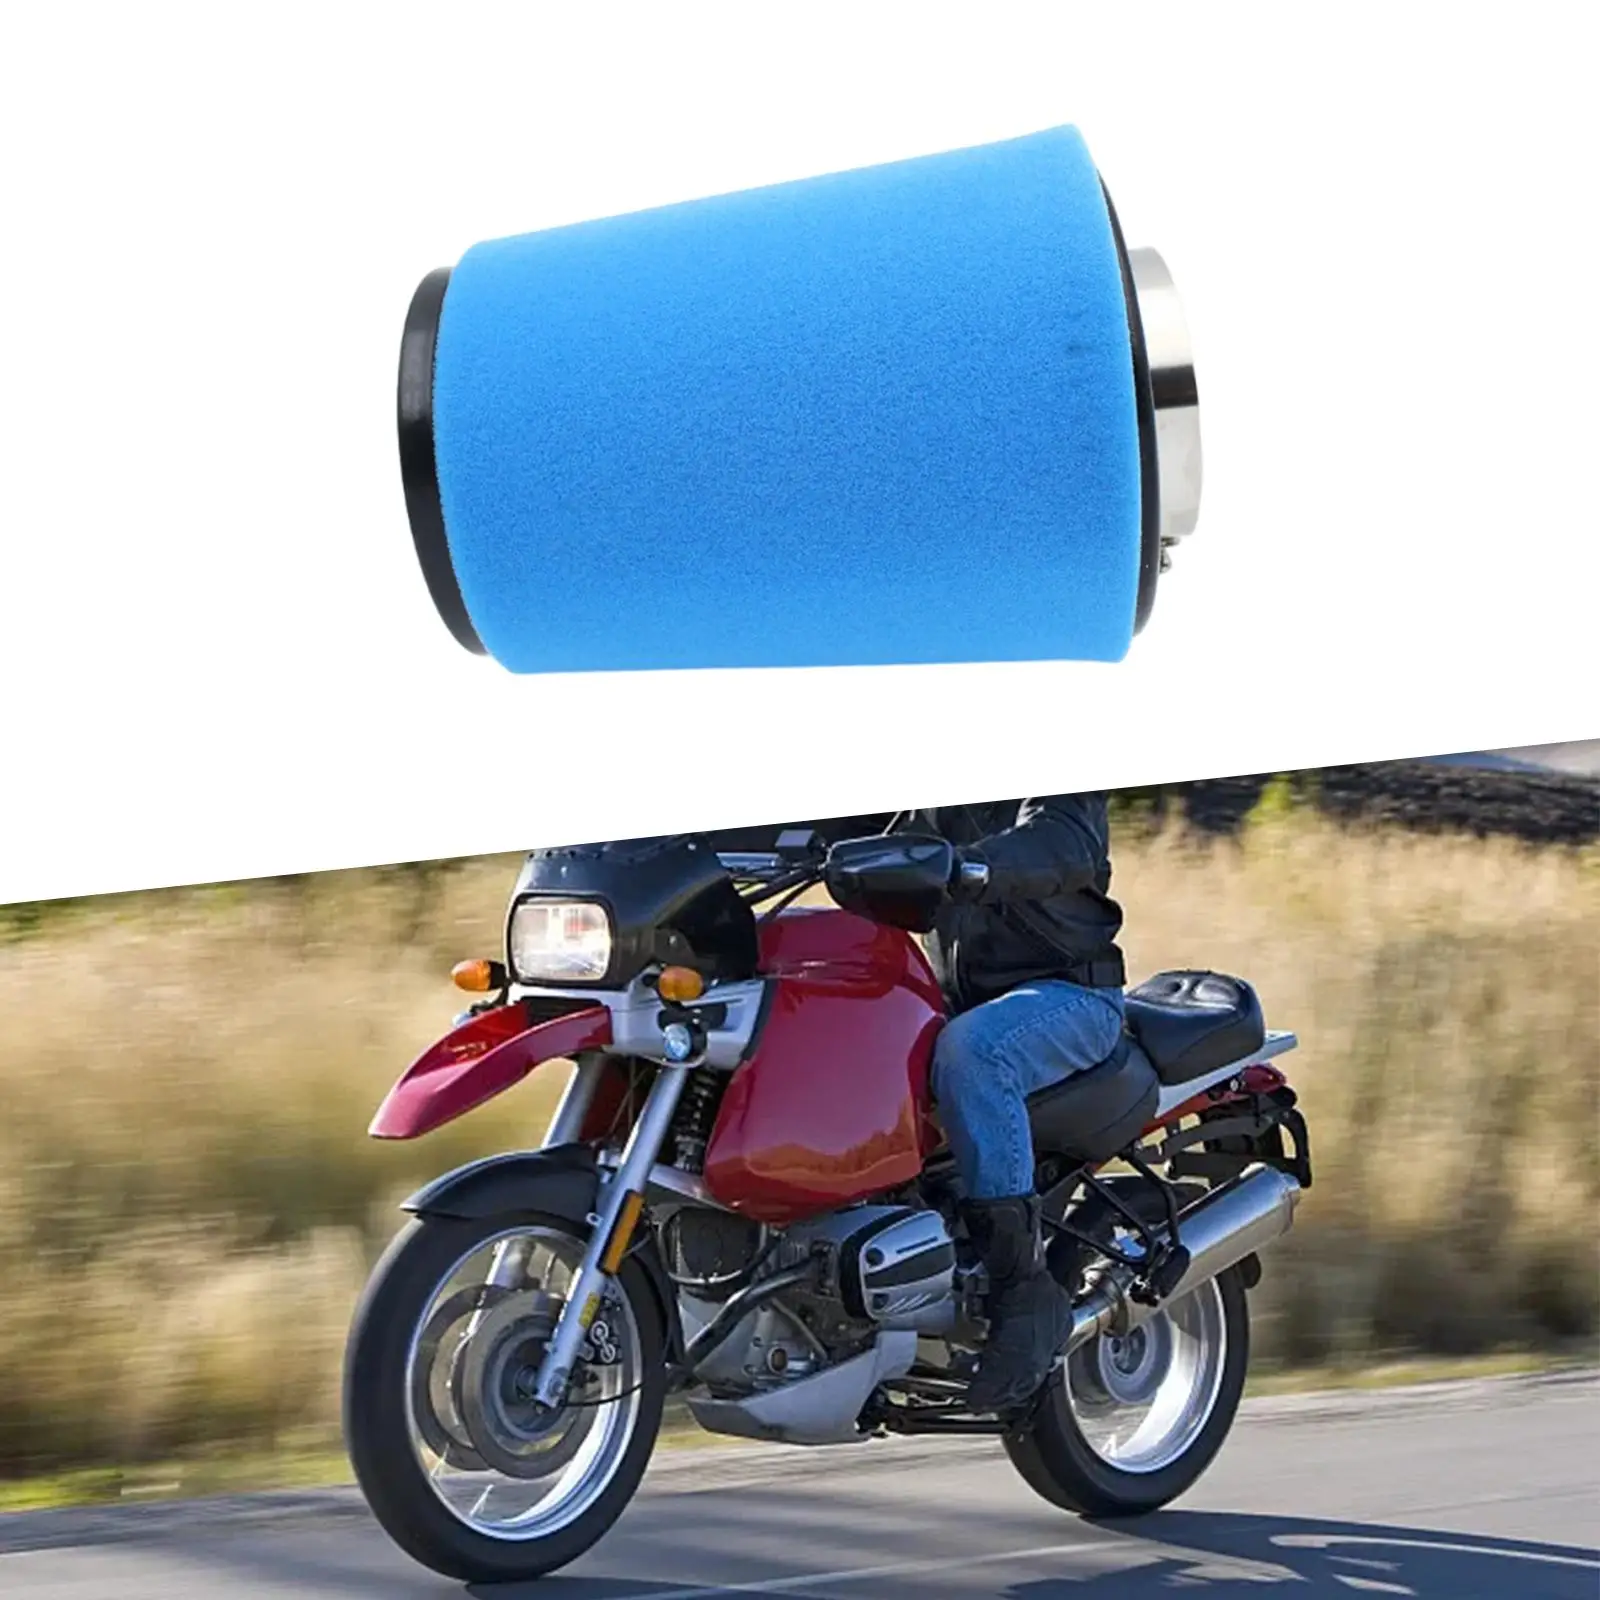 Air Filter 0800-112000 Motorbike Part High Efficiency Professional for Cfmoto x8 Cforce 400 500 500S 800 Uforce 500 800